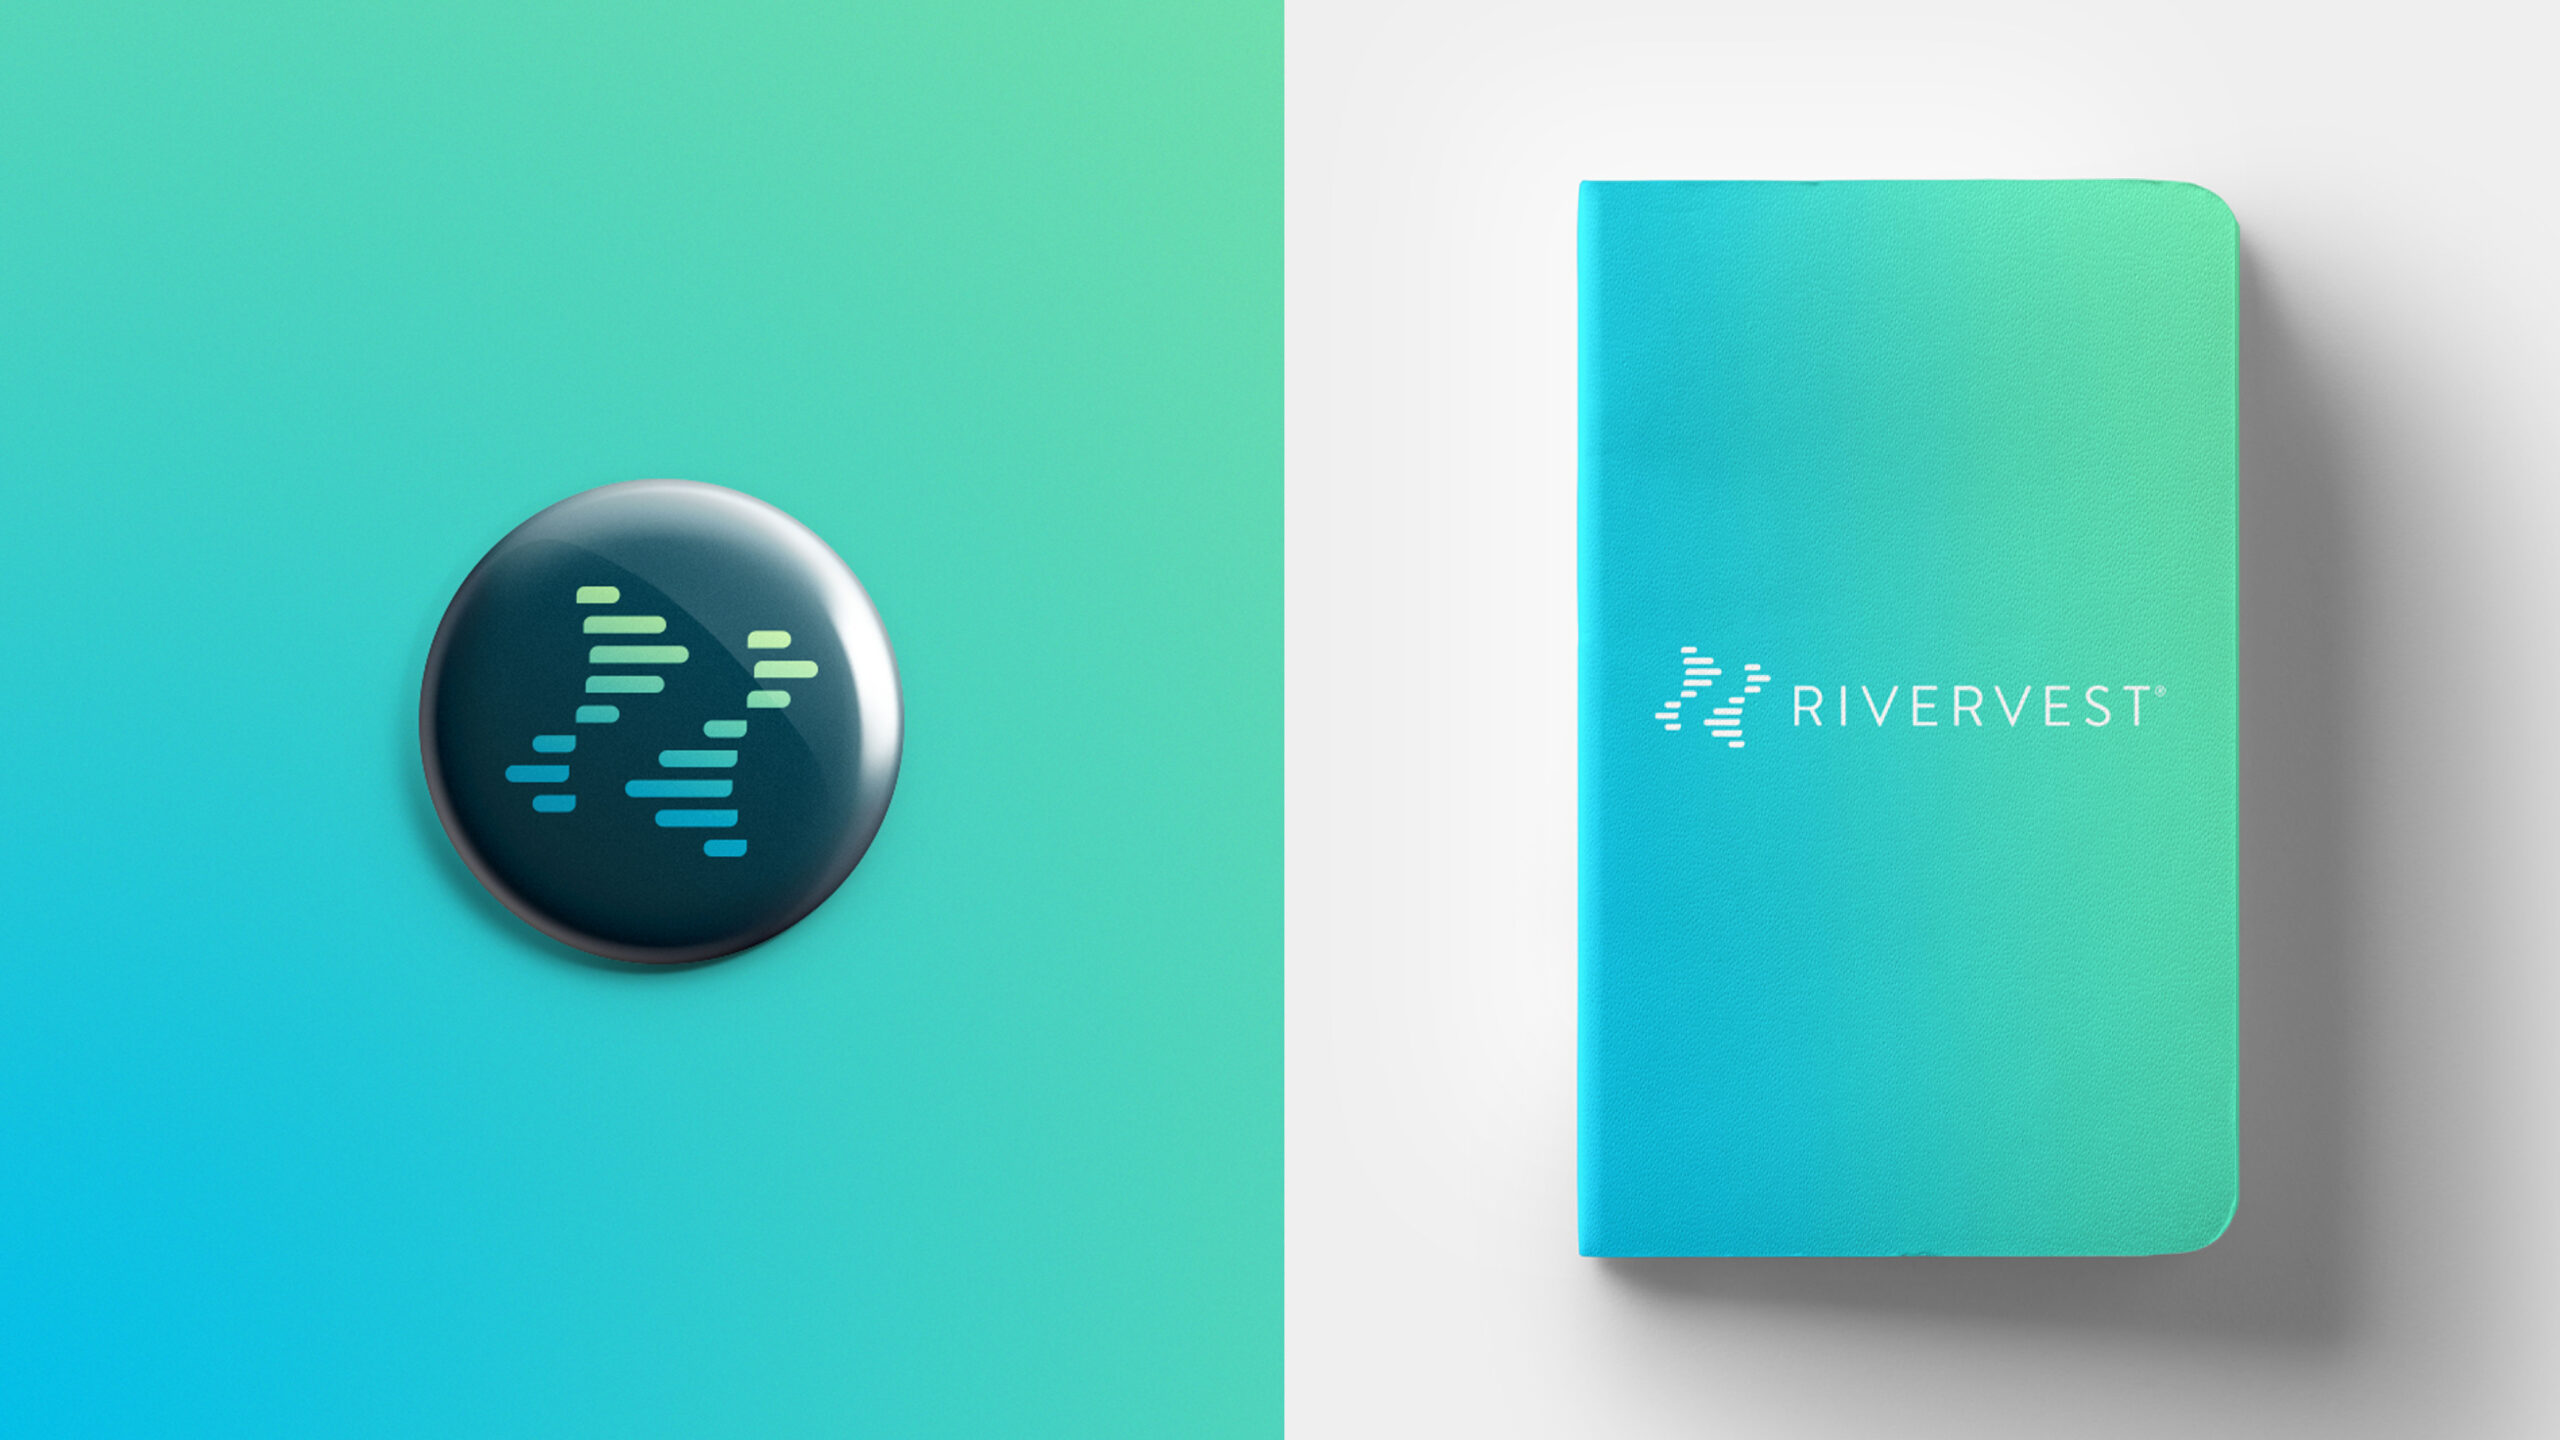 RiverVest branded pin and notebook